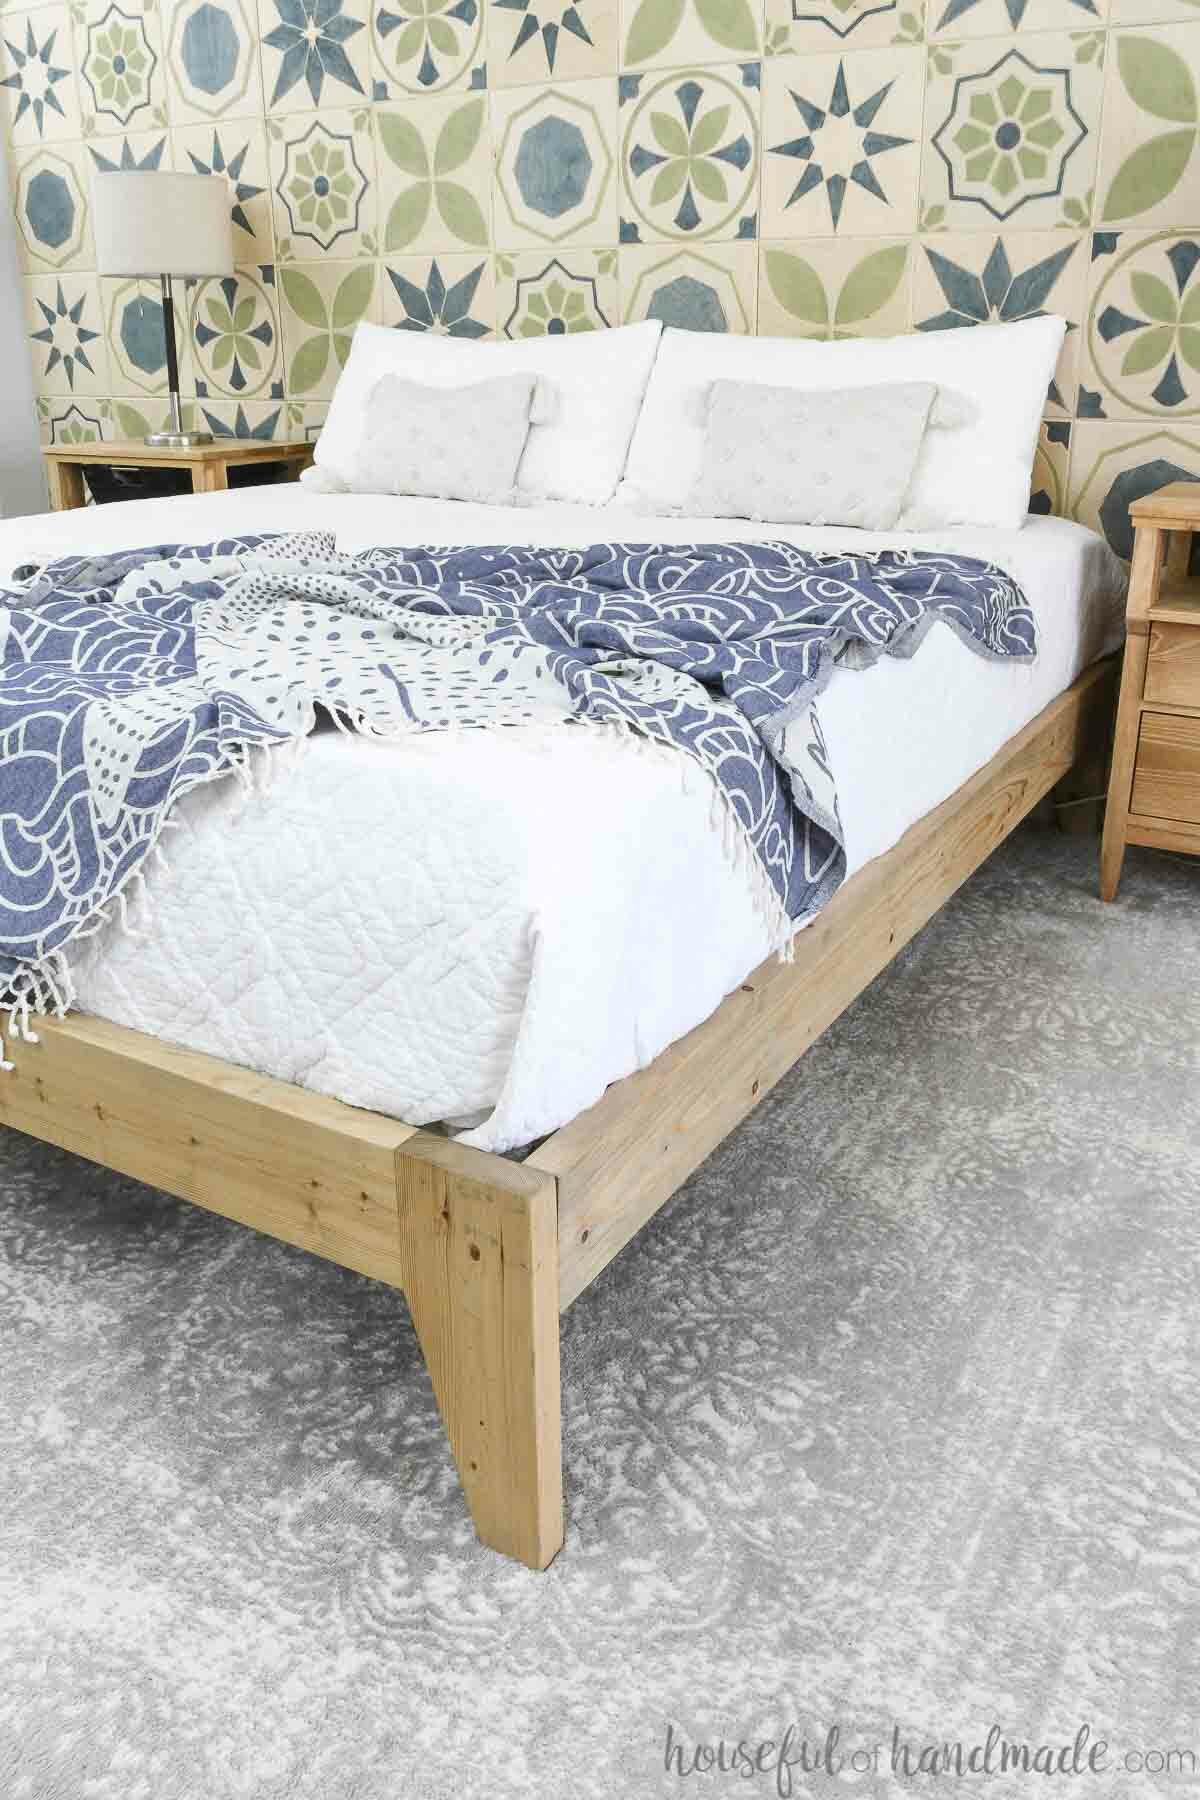 Bed on a wood bed frame with tapered legs covered in a white blanket. 